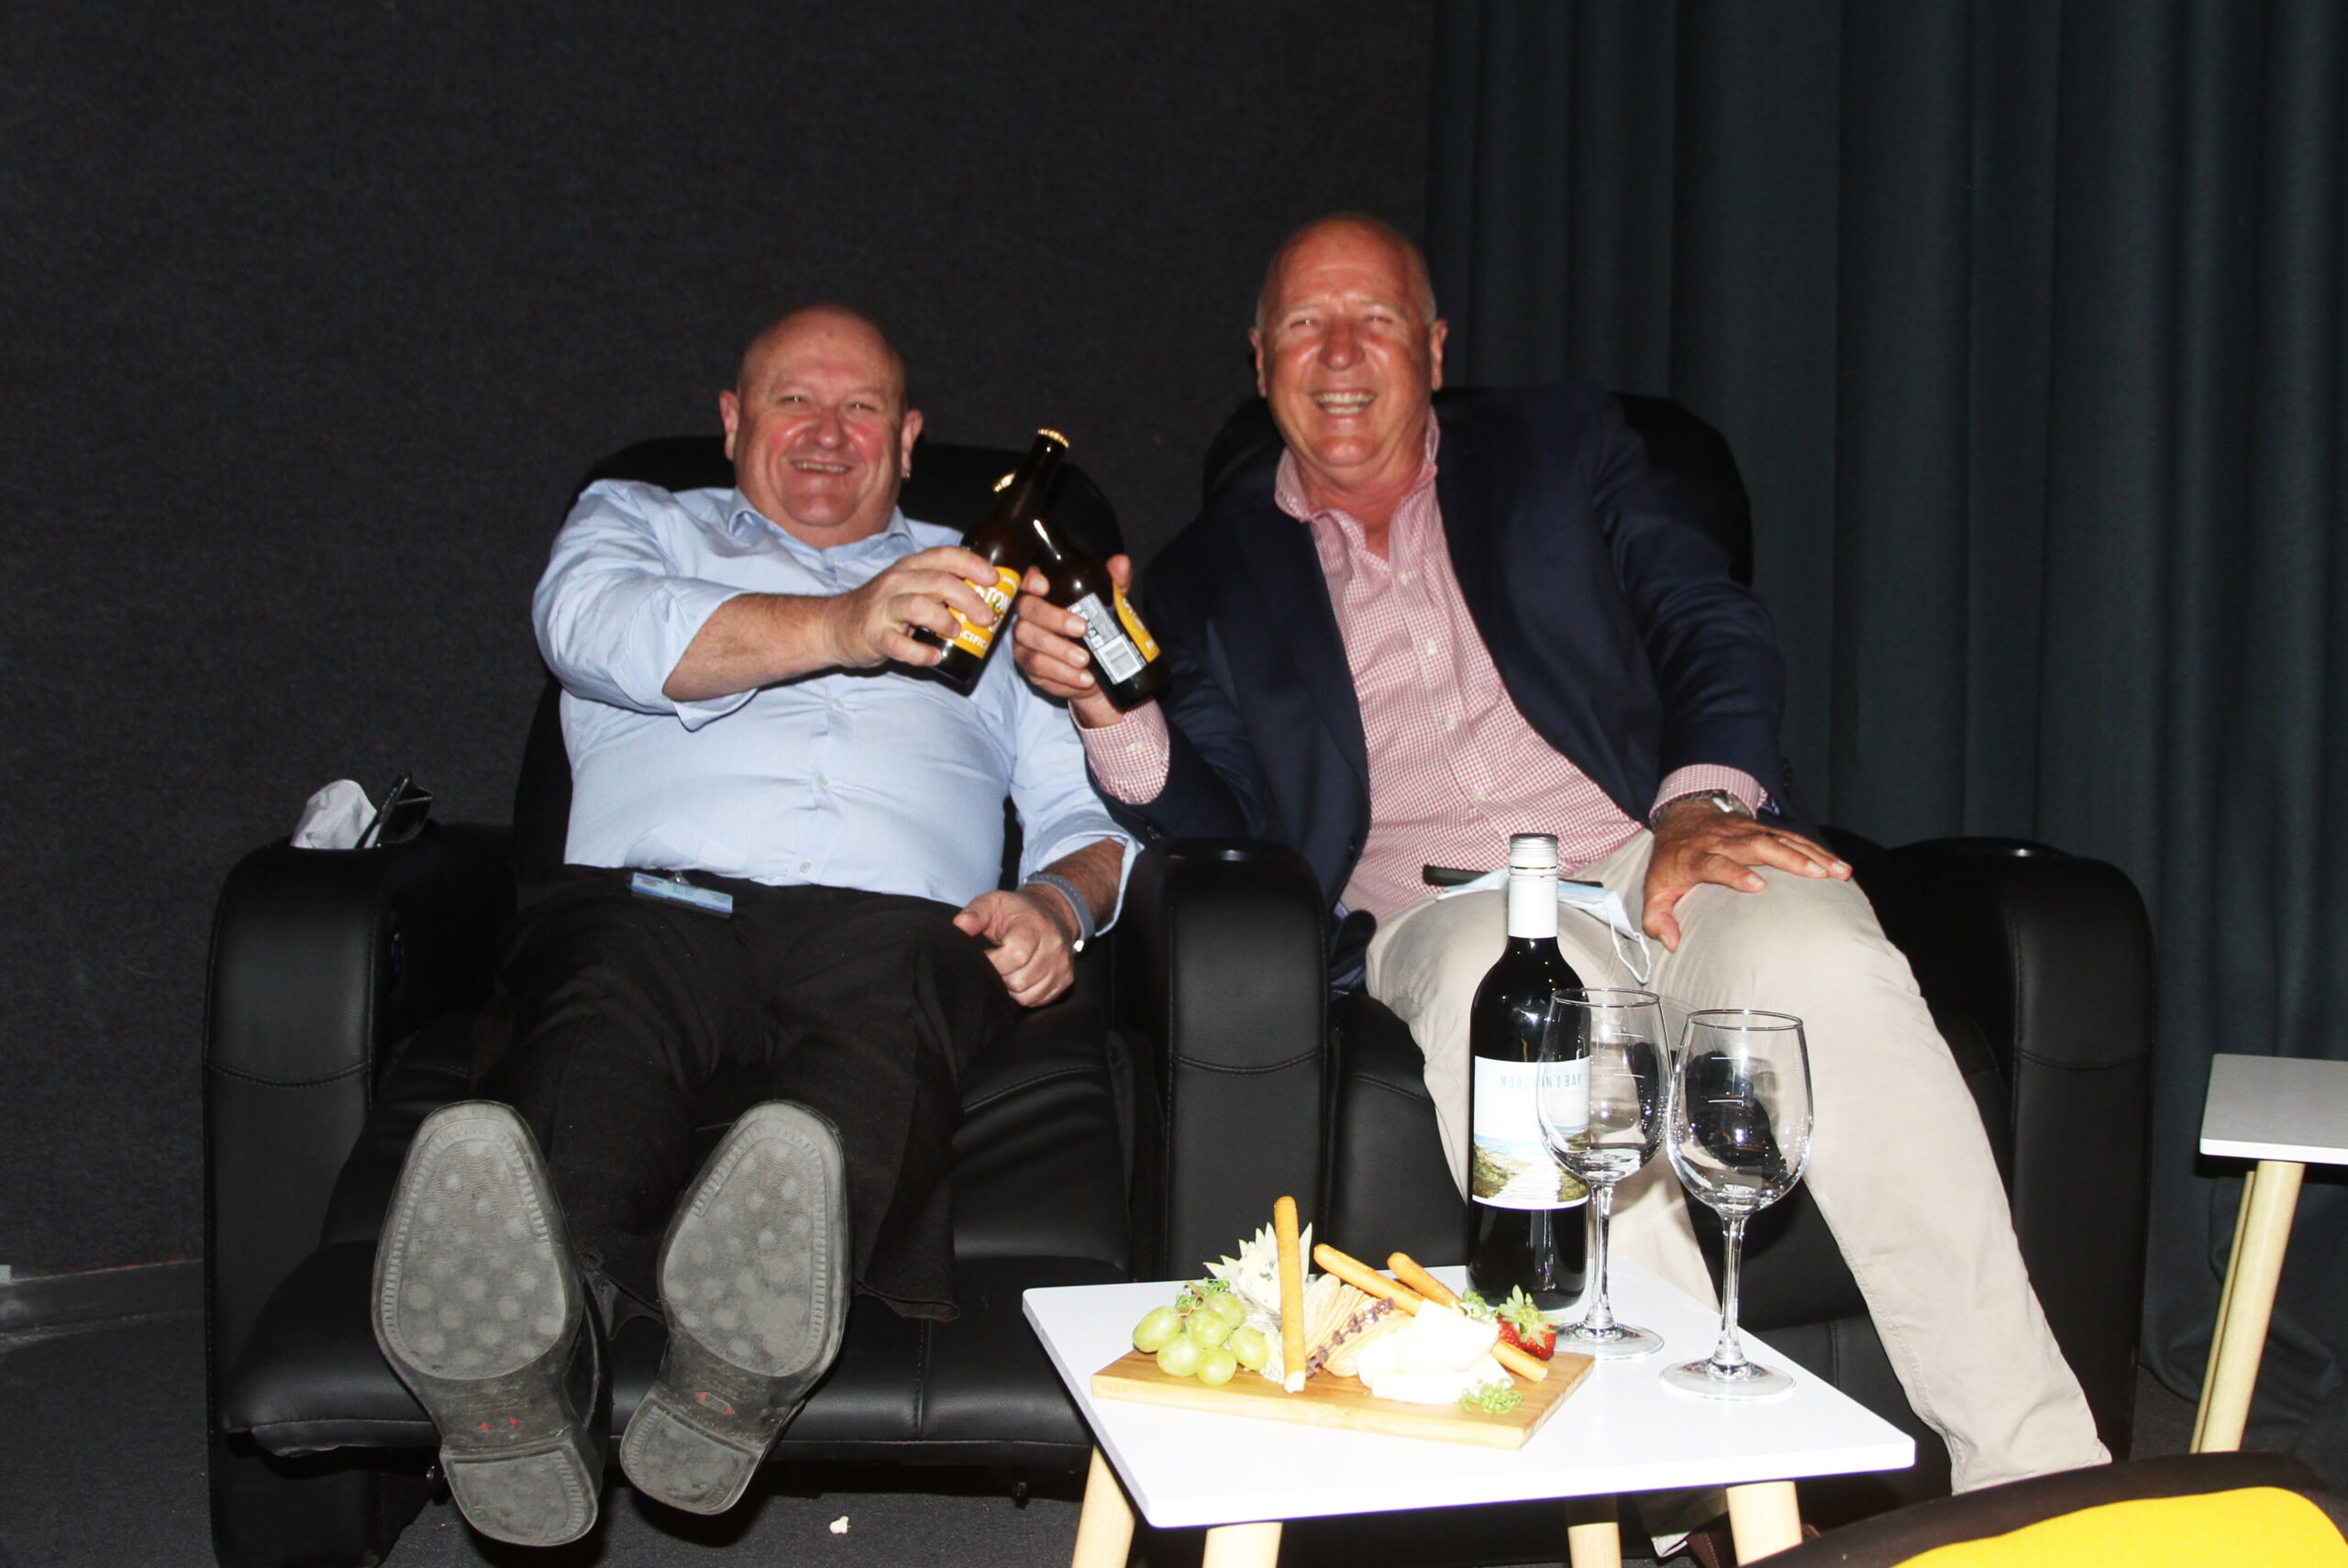 Five-star cinema seating unveiled at The Crossing Theatre